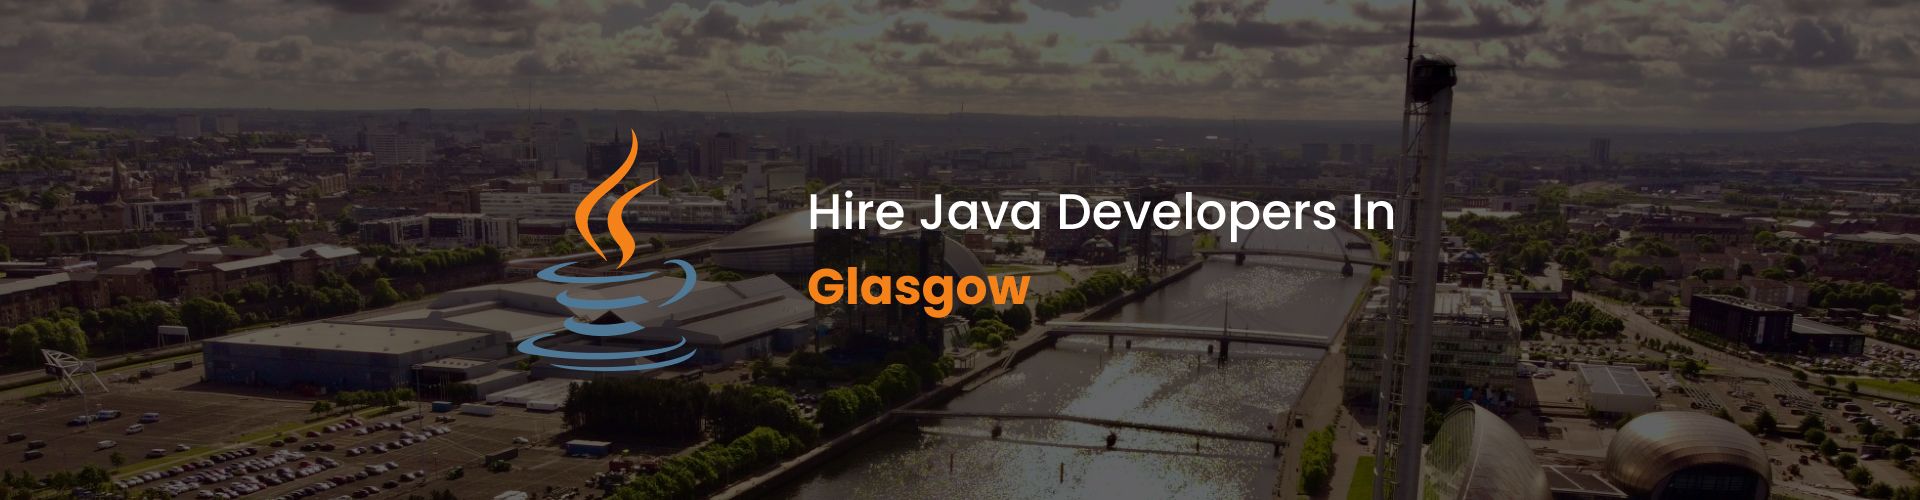 hire java developers in glasgow